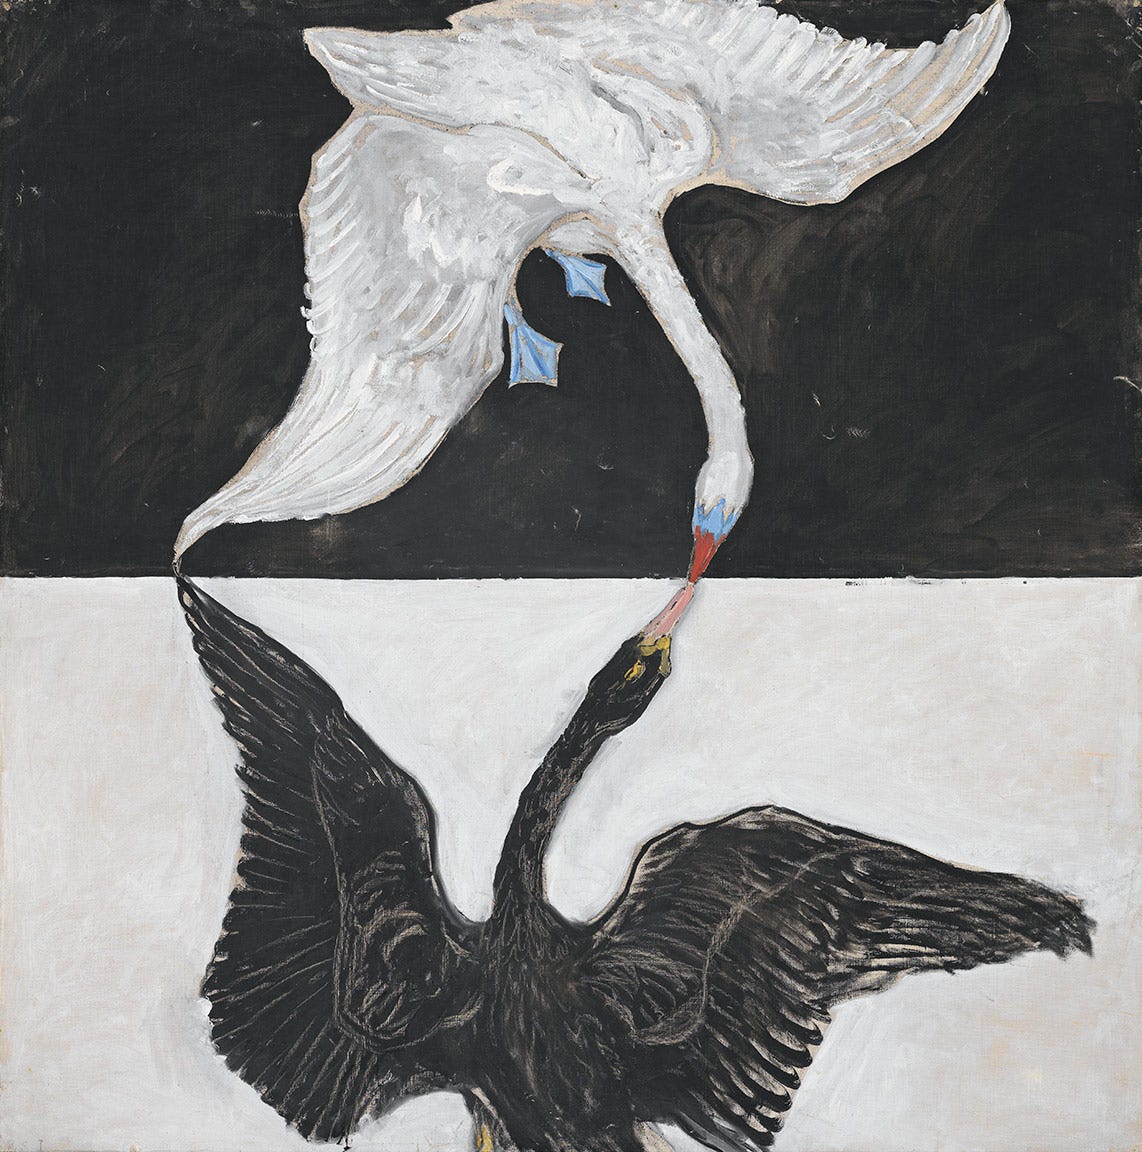 Group IX/SUW, The Swan, No. 1 (1915) by Hilma af Klint | The Guggenheim  Museums and Foundation